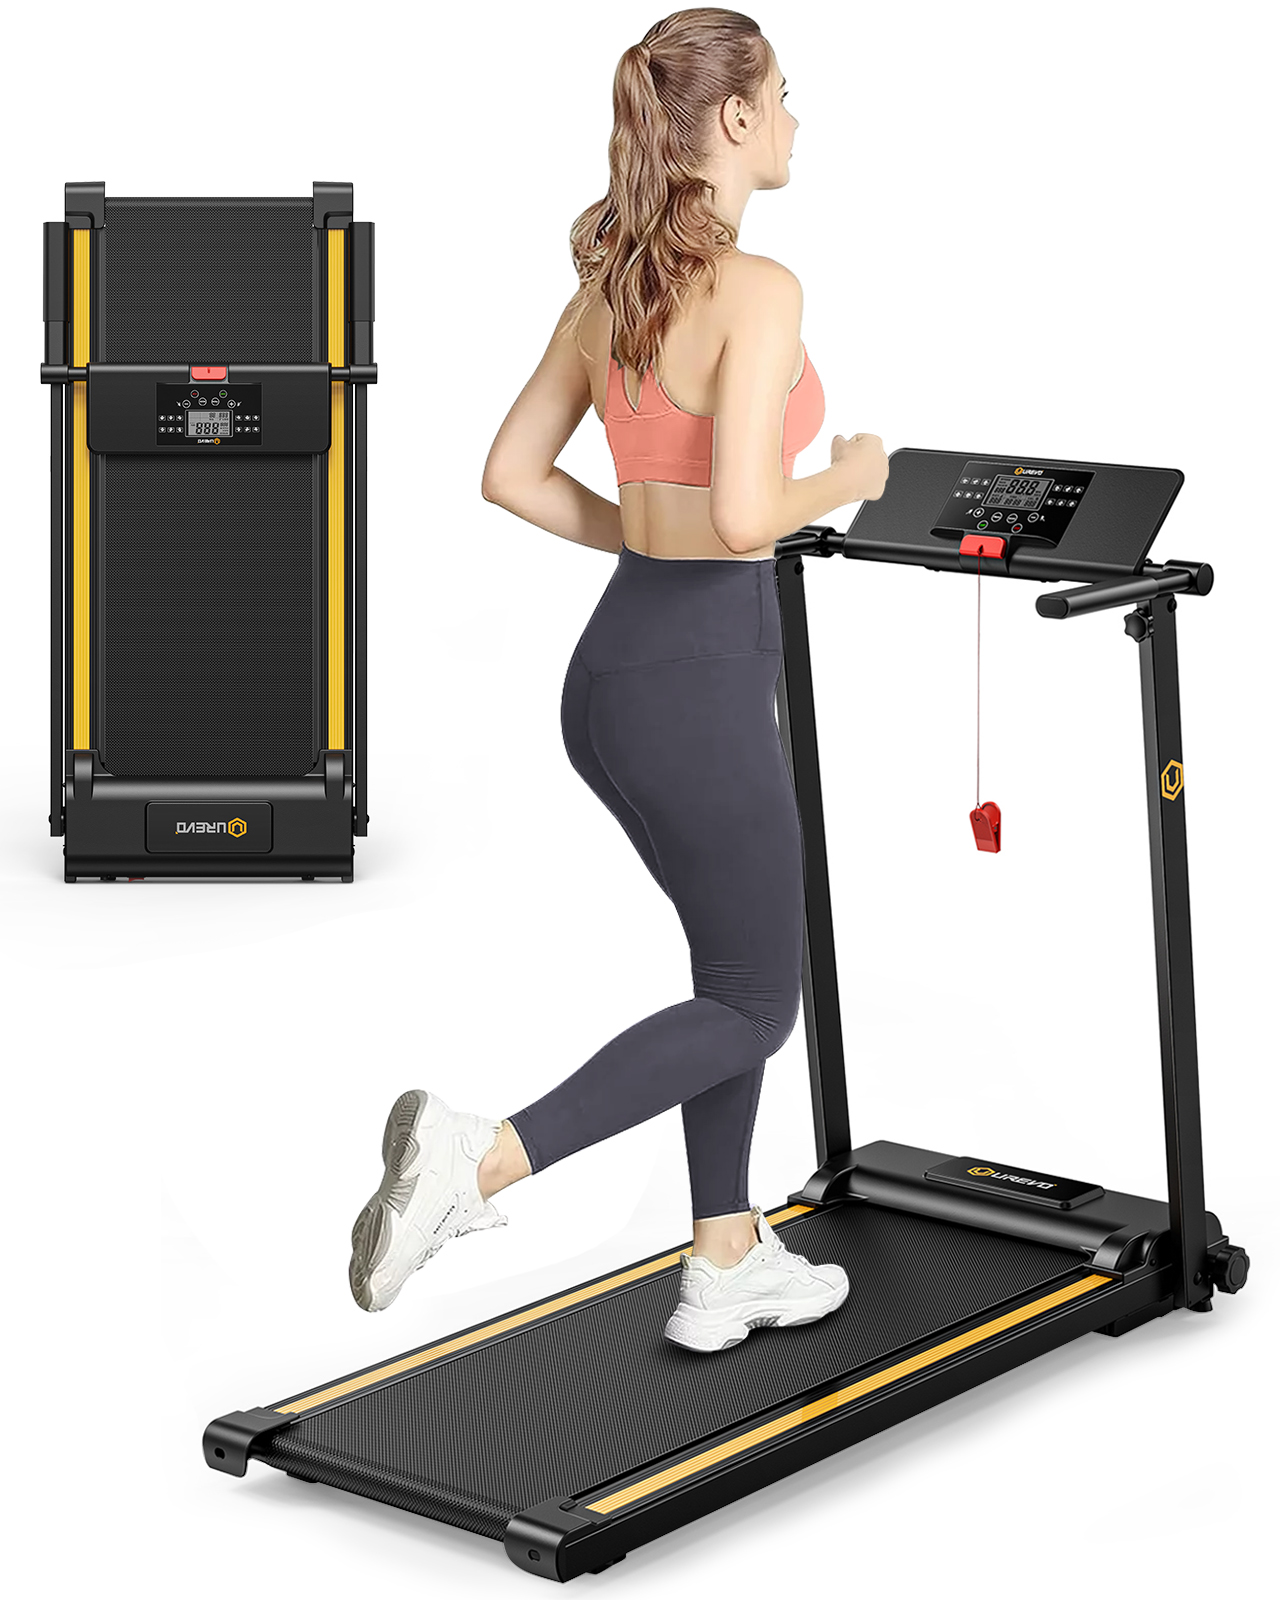 UREVO Folding Treadmill, 2.25HP Portable Mini Treadmills for Home Office, Compact Threadmill with 12 HIIT Modes, LCD Display, 265 lbs Capacity - image 1 of 12